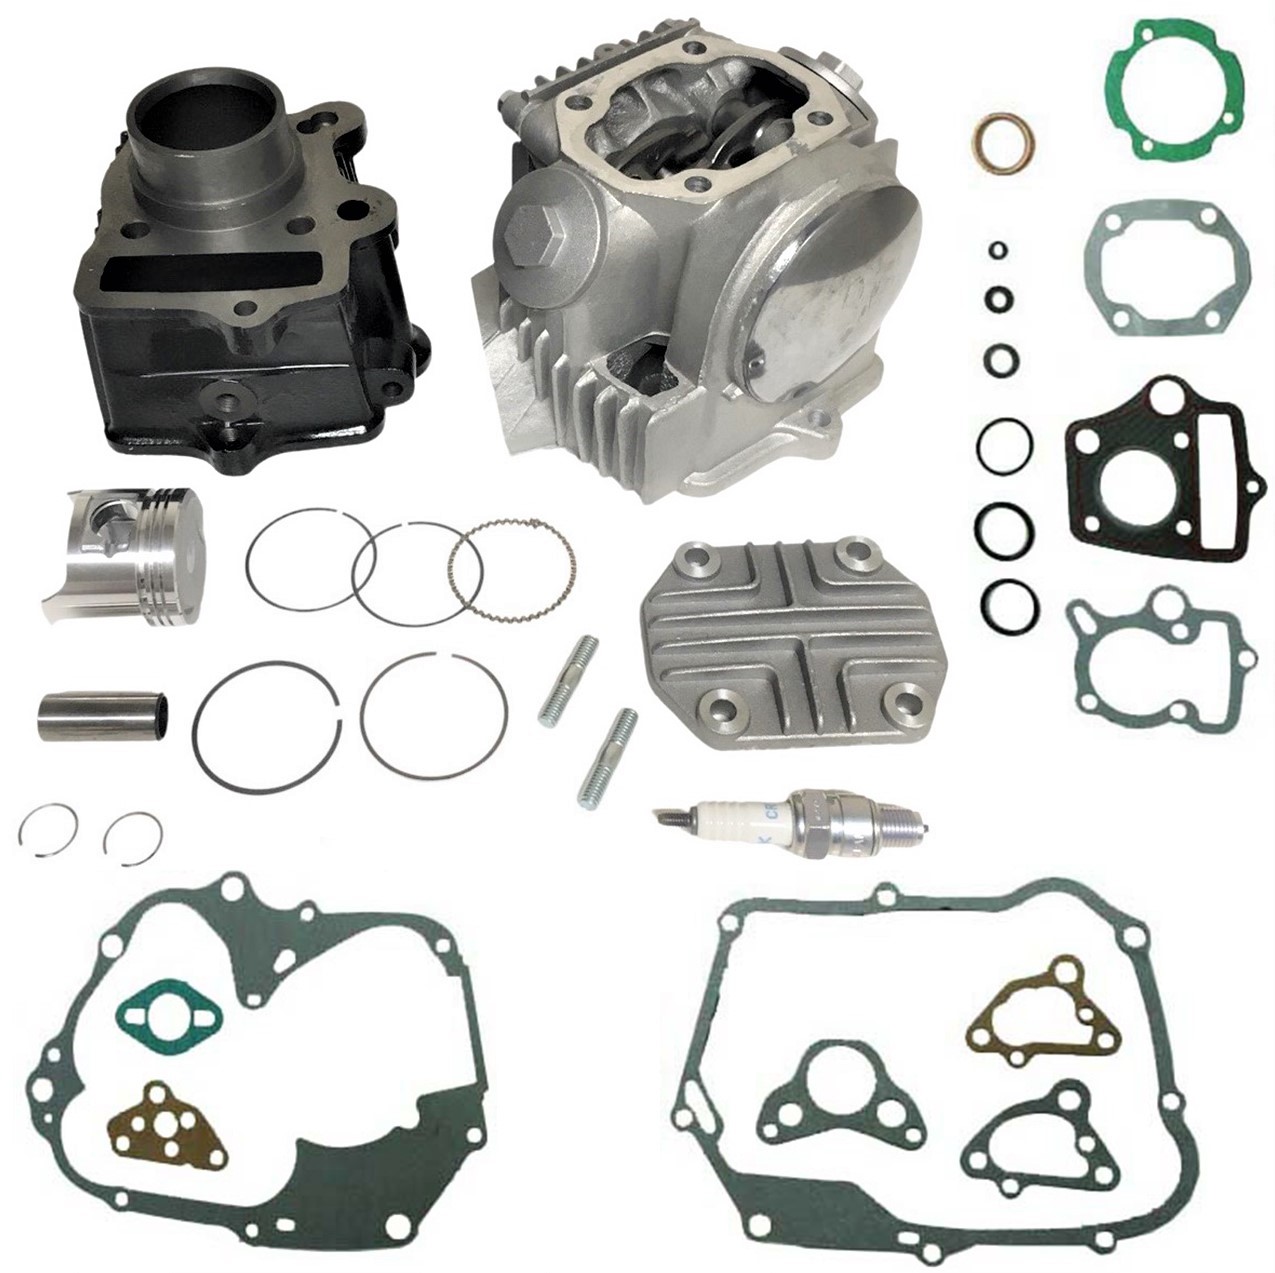 Cylinder & Head kit 70cc Chinese ATVs and Dirtbikes - Click Image to Close